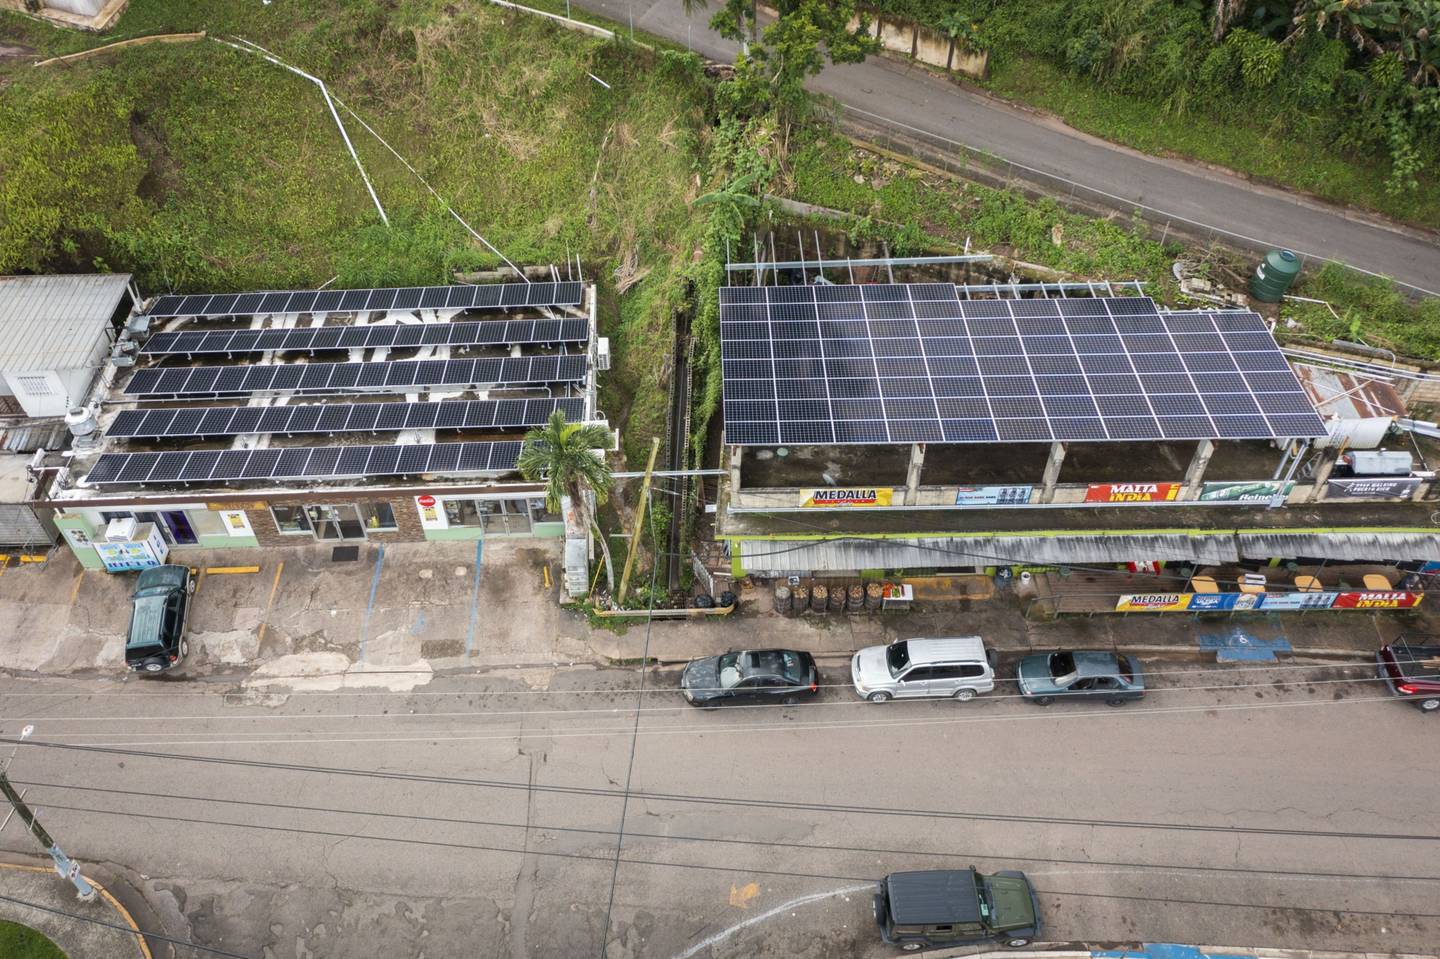 Solar panels on the roofs of businesses that make up part of the microgrid in Castañer. dfd